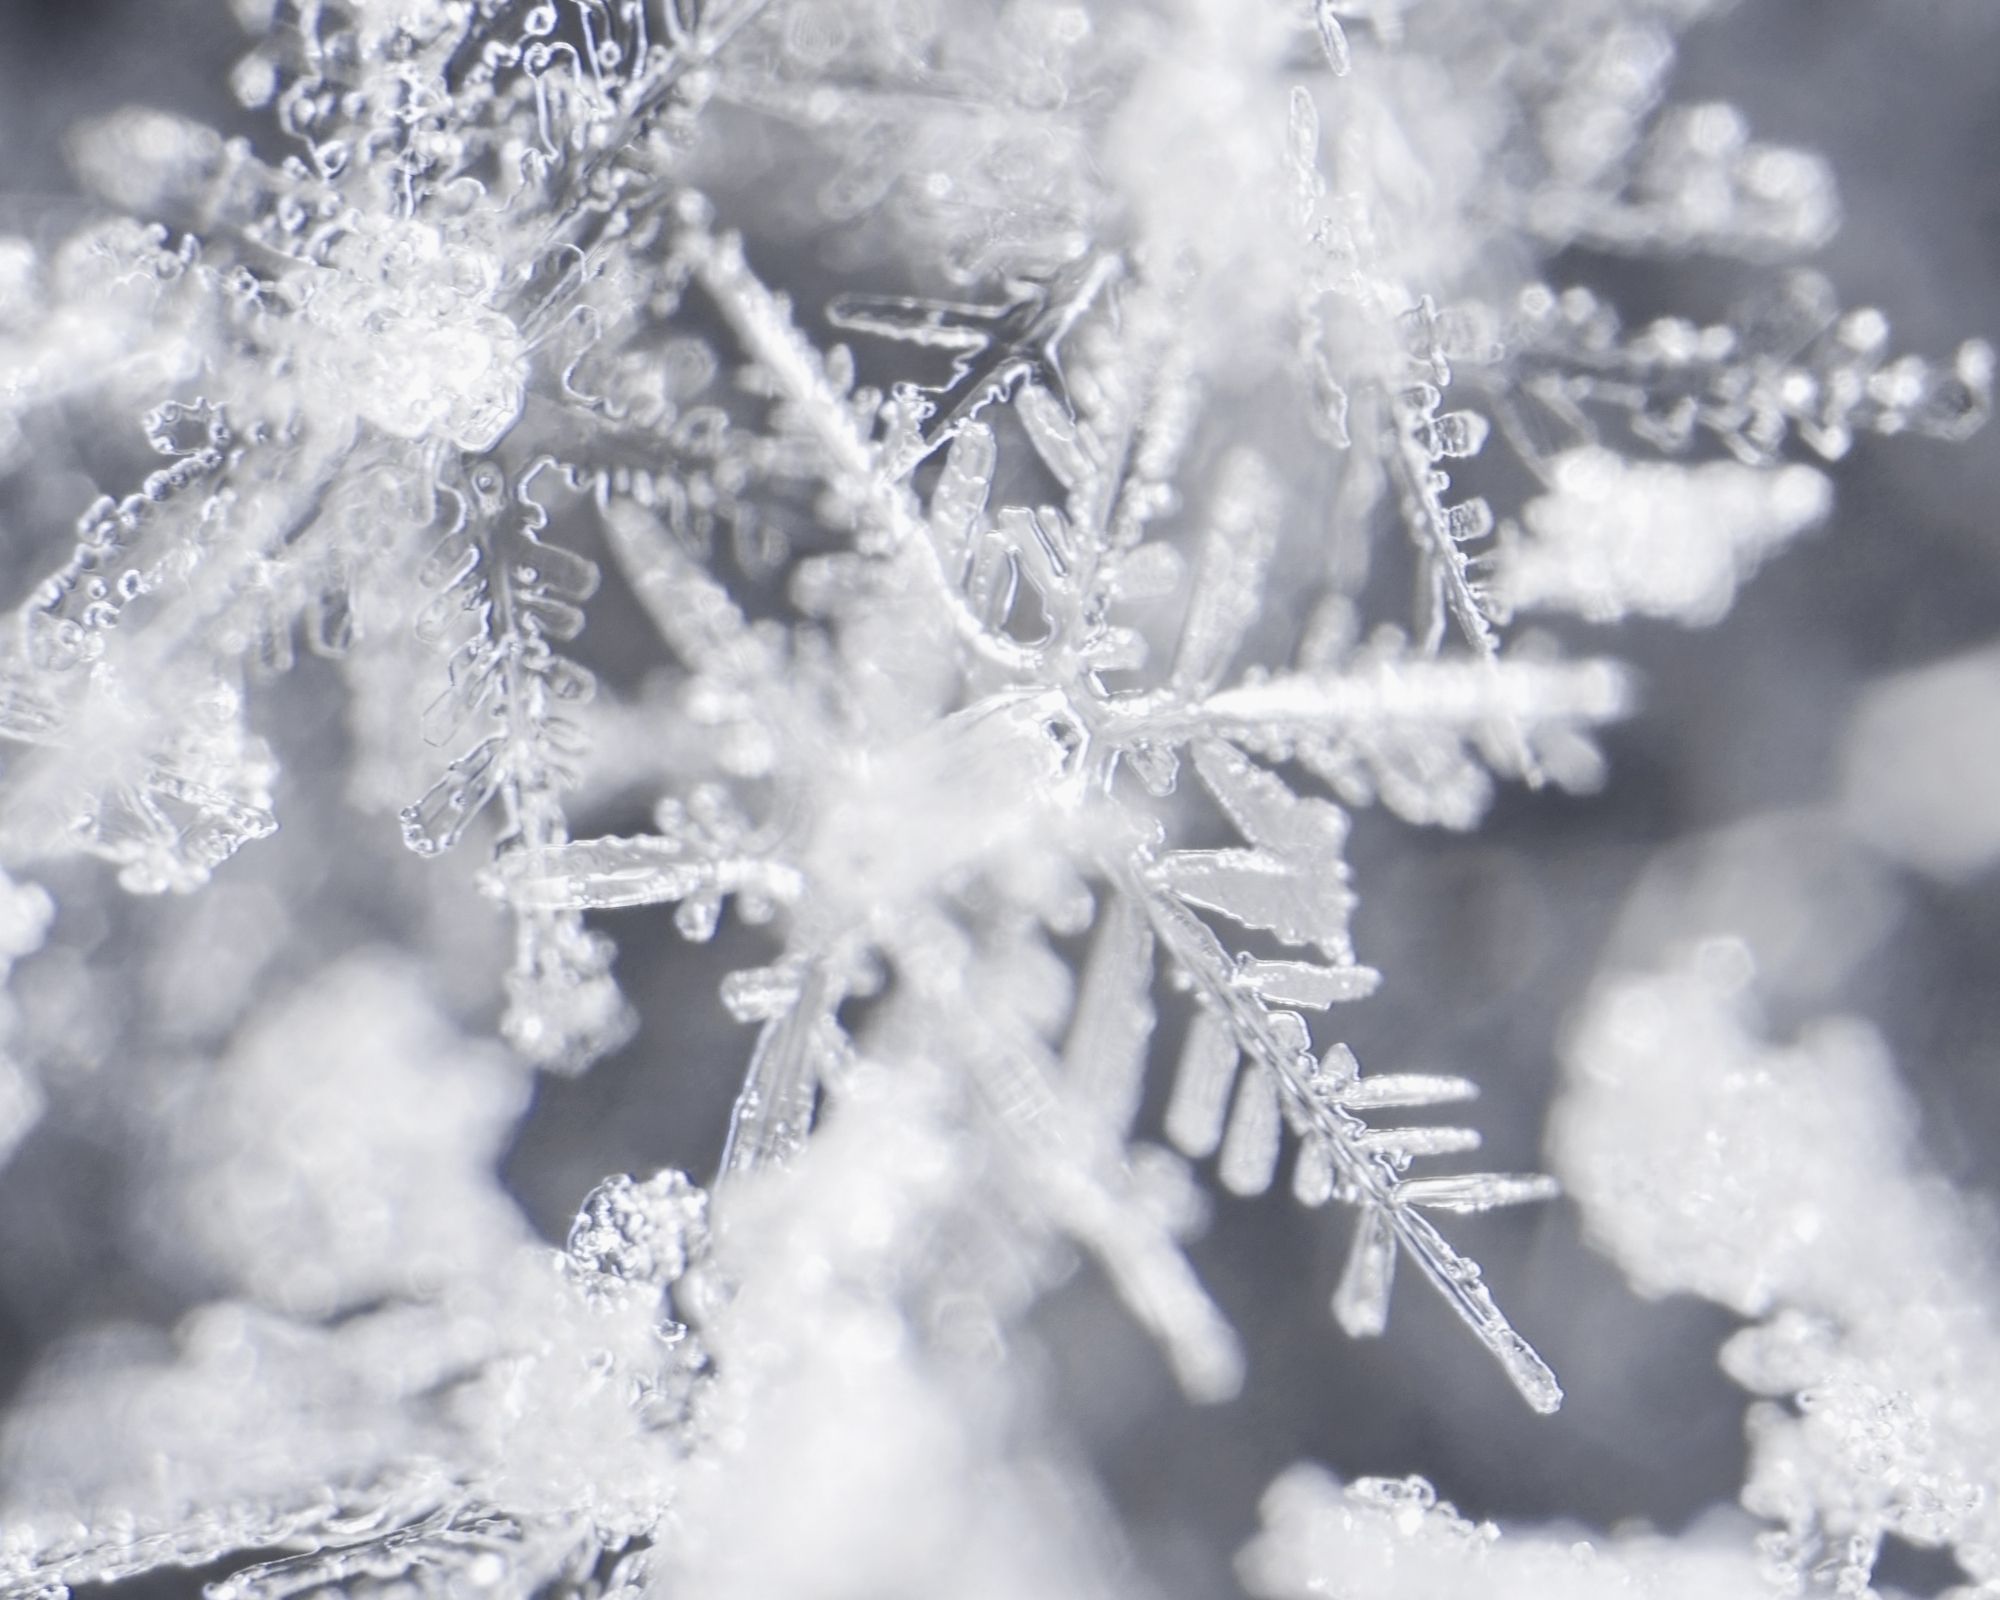 Survive and thrive the holidays; A close up shows snowflakes.